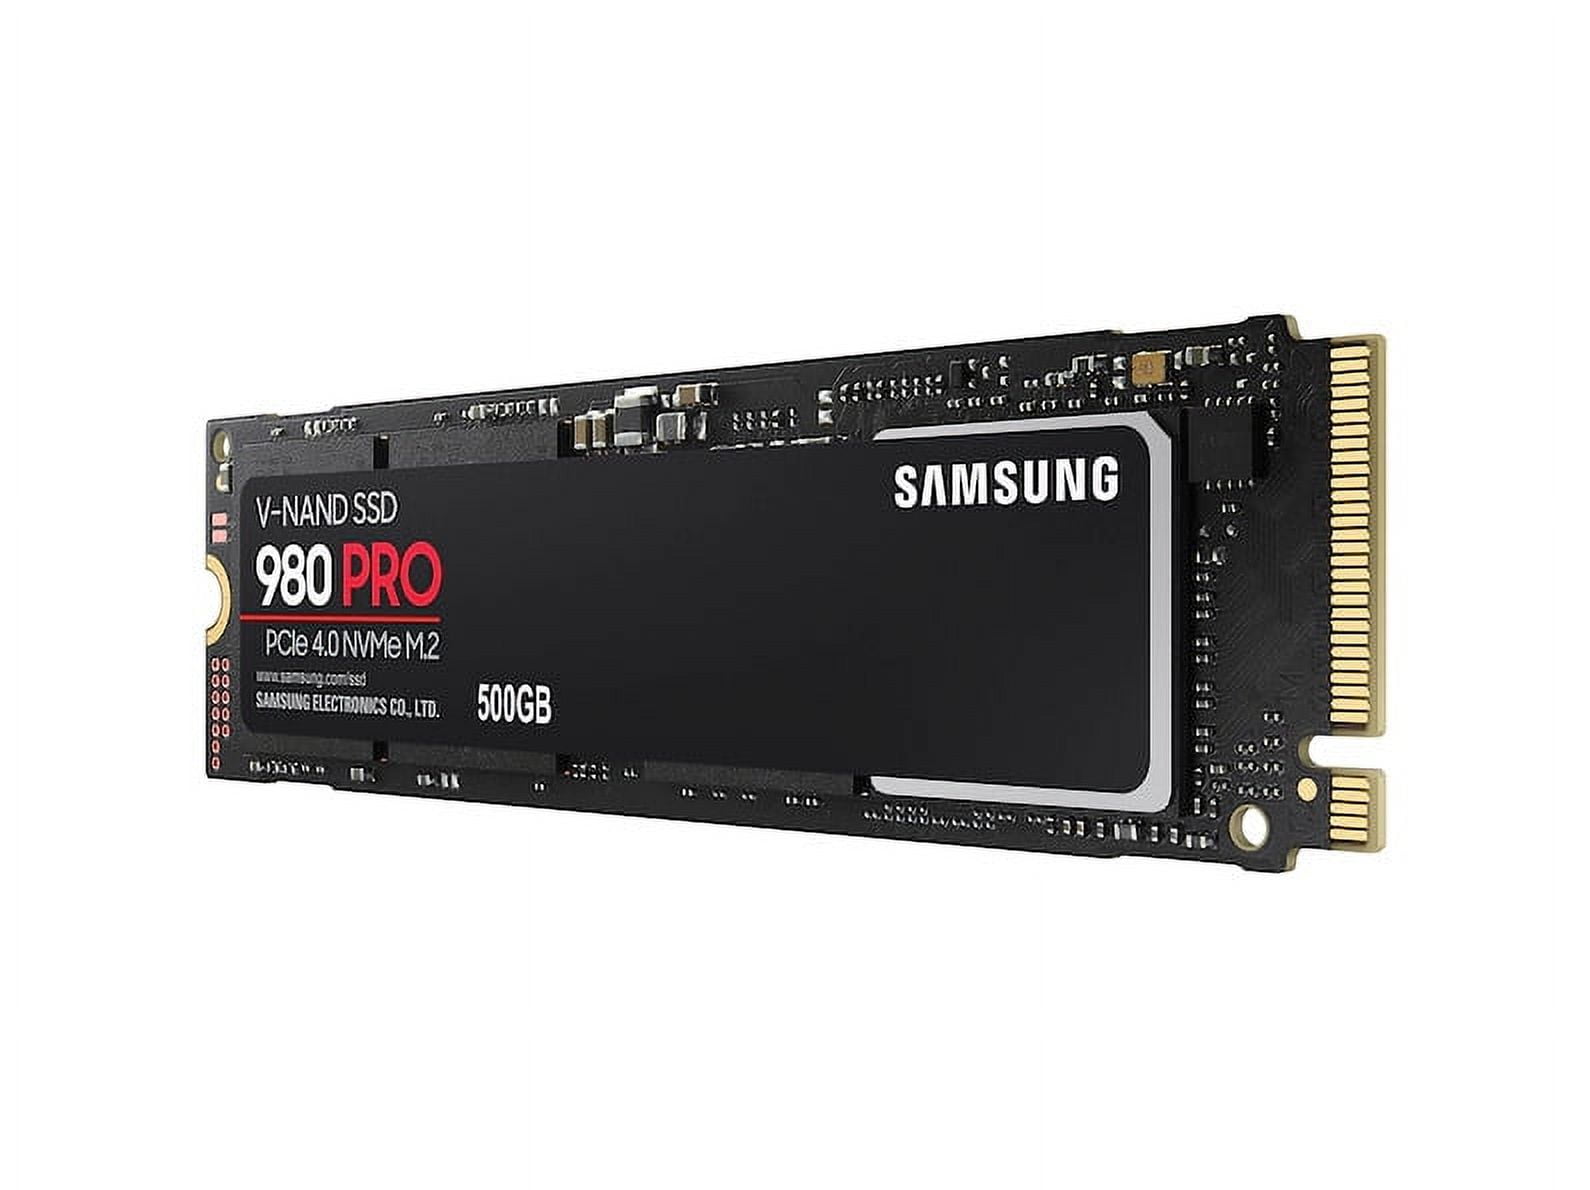 Pick up Samsung's 1TB 980 NVMe SSD for less than £40